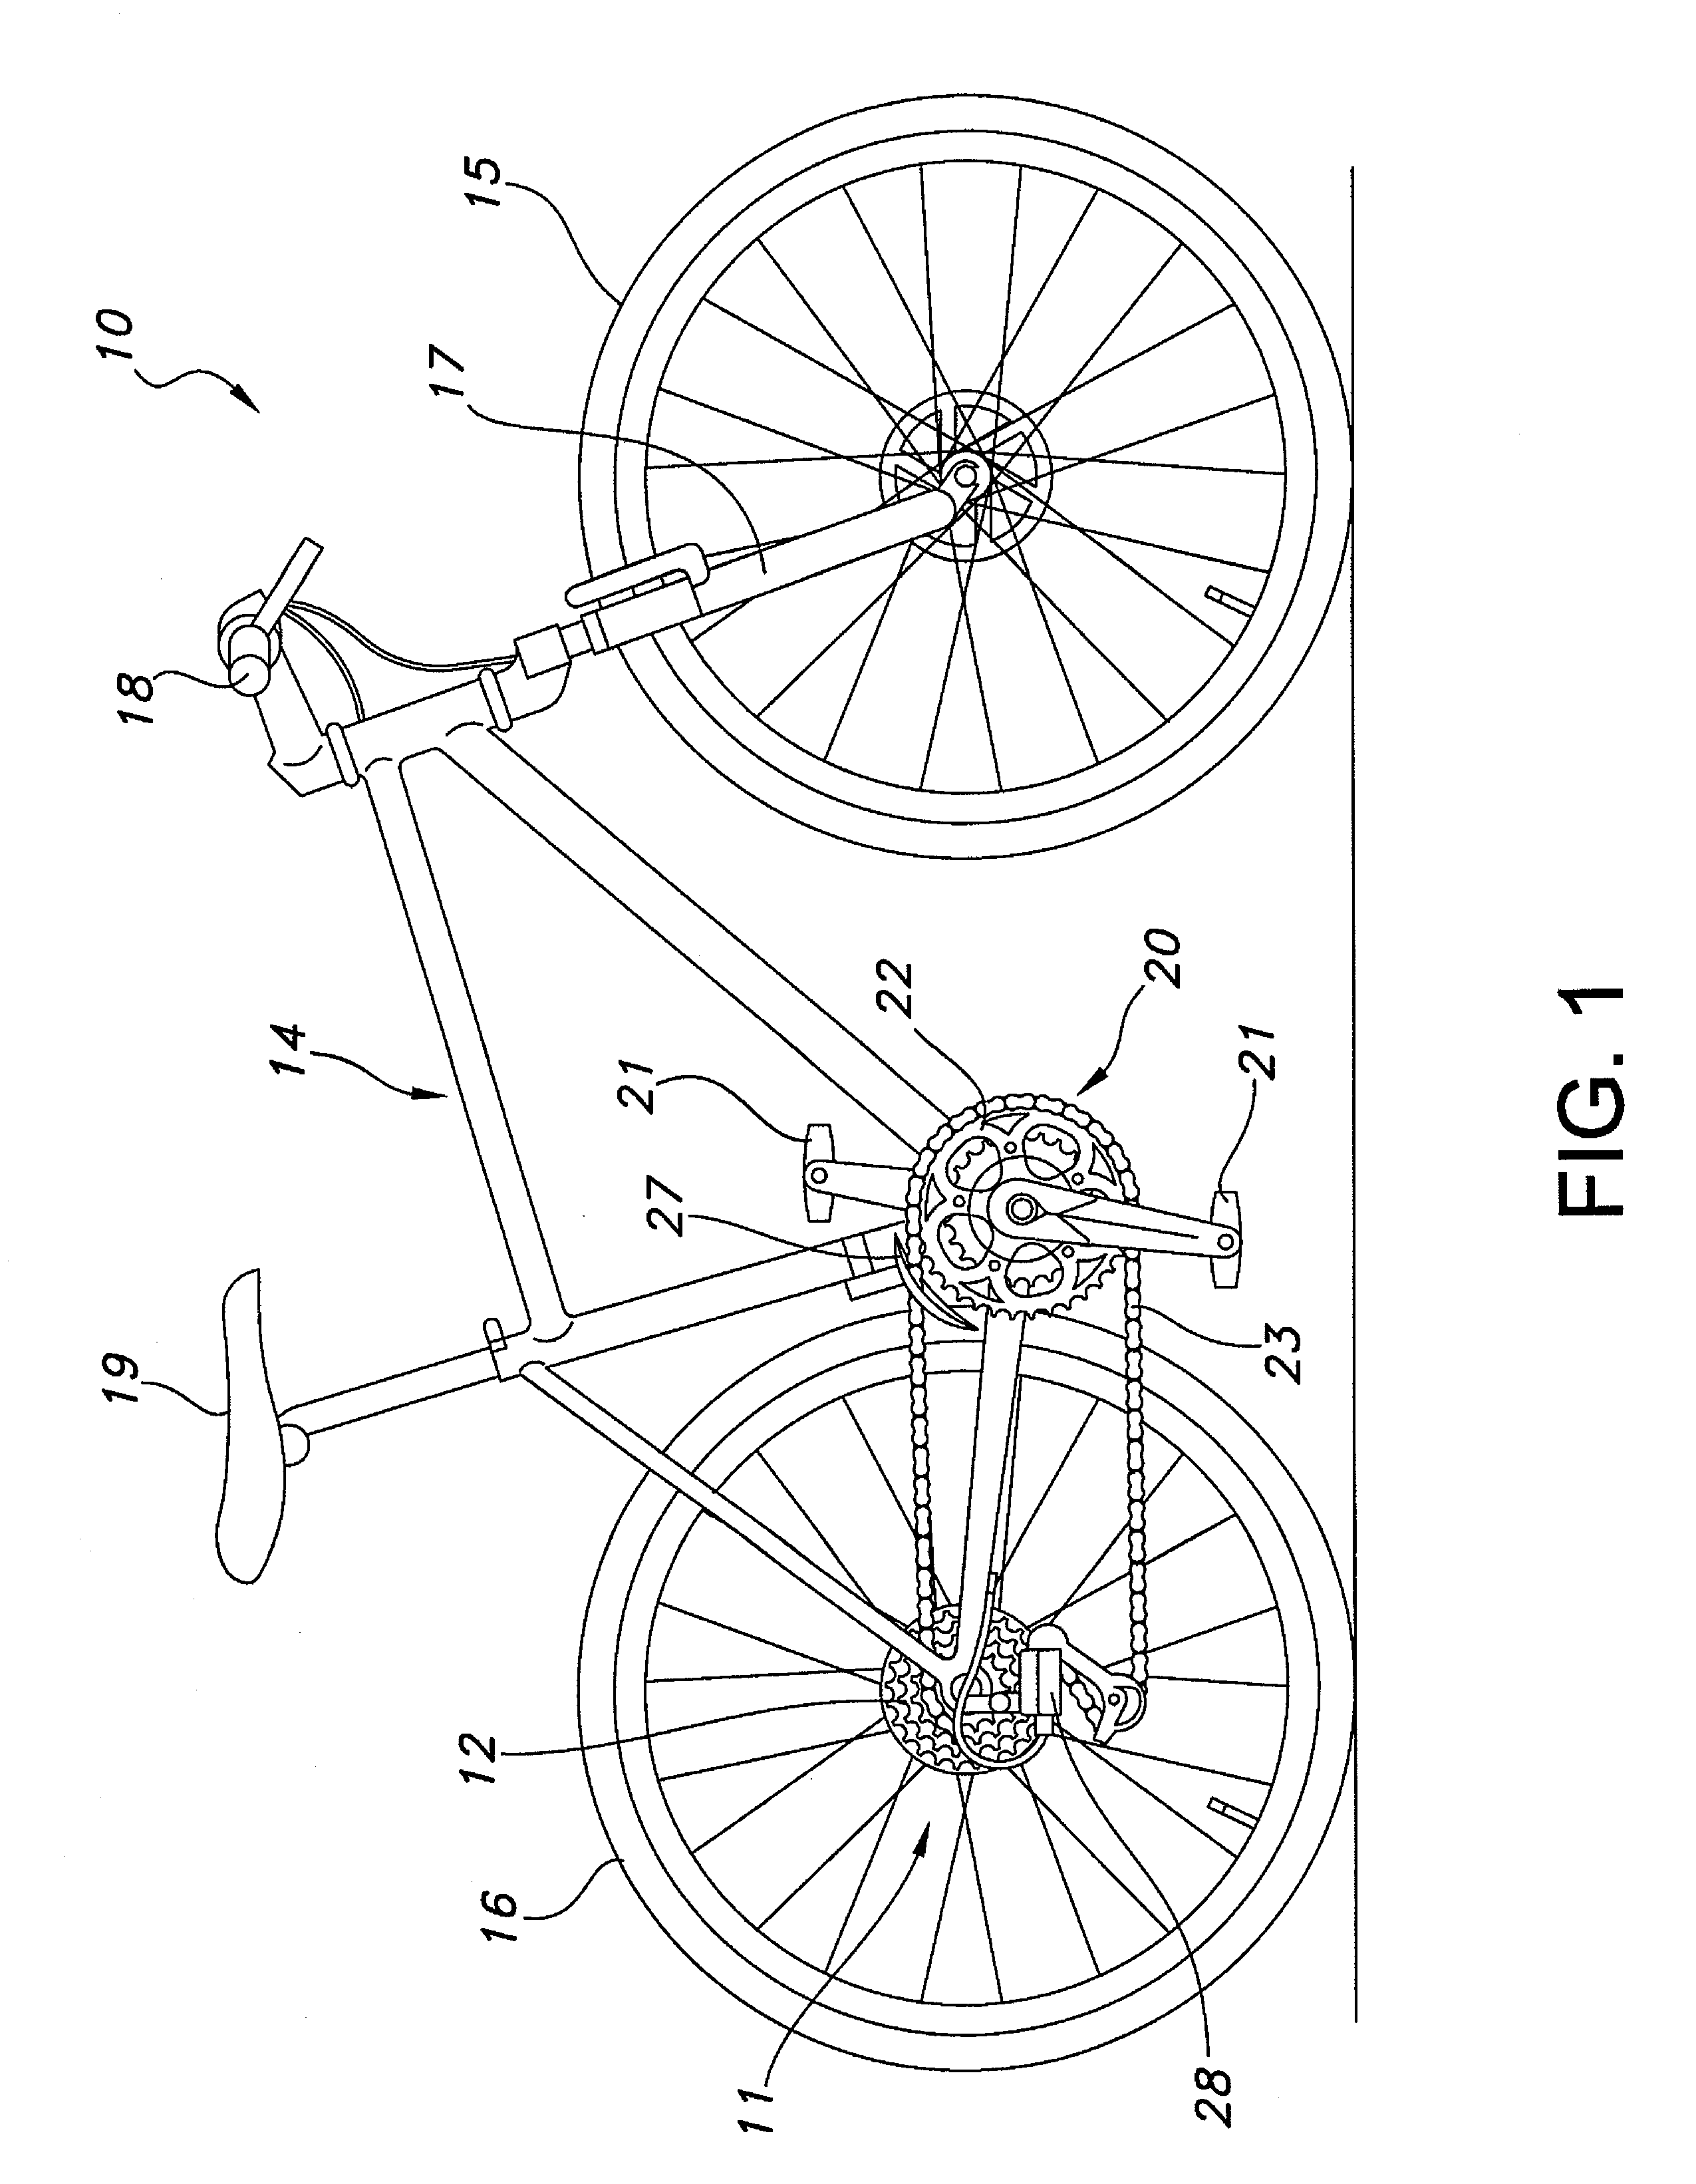 Bicycle rear sprocket assembly